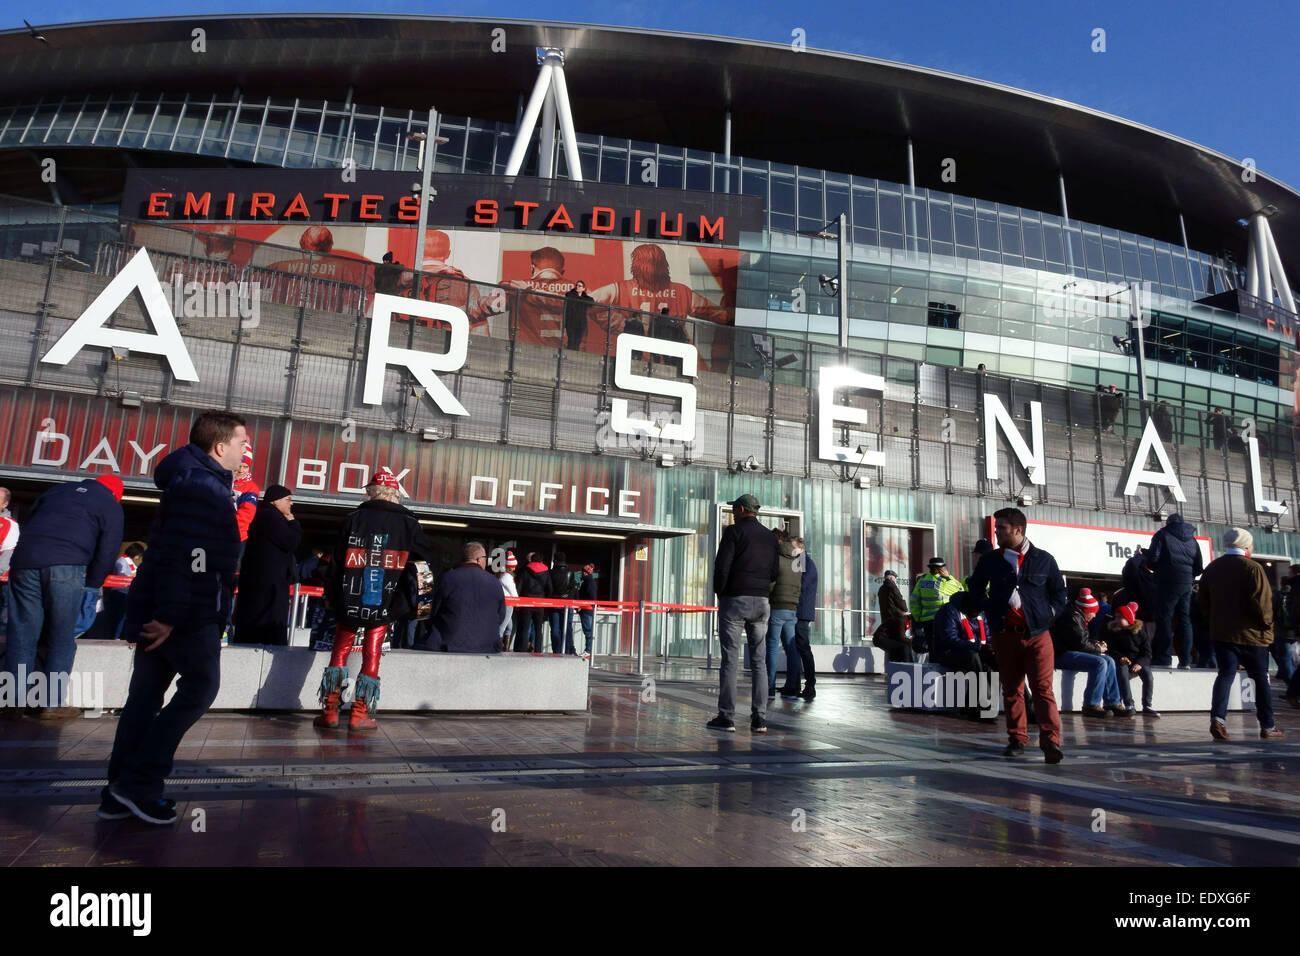 Match day at Arsenal football club Emirates Stadium, London - fans arriving for game against Stoke City Stock Photo